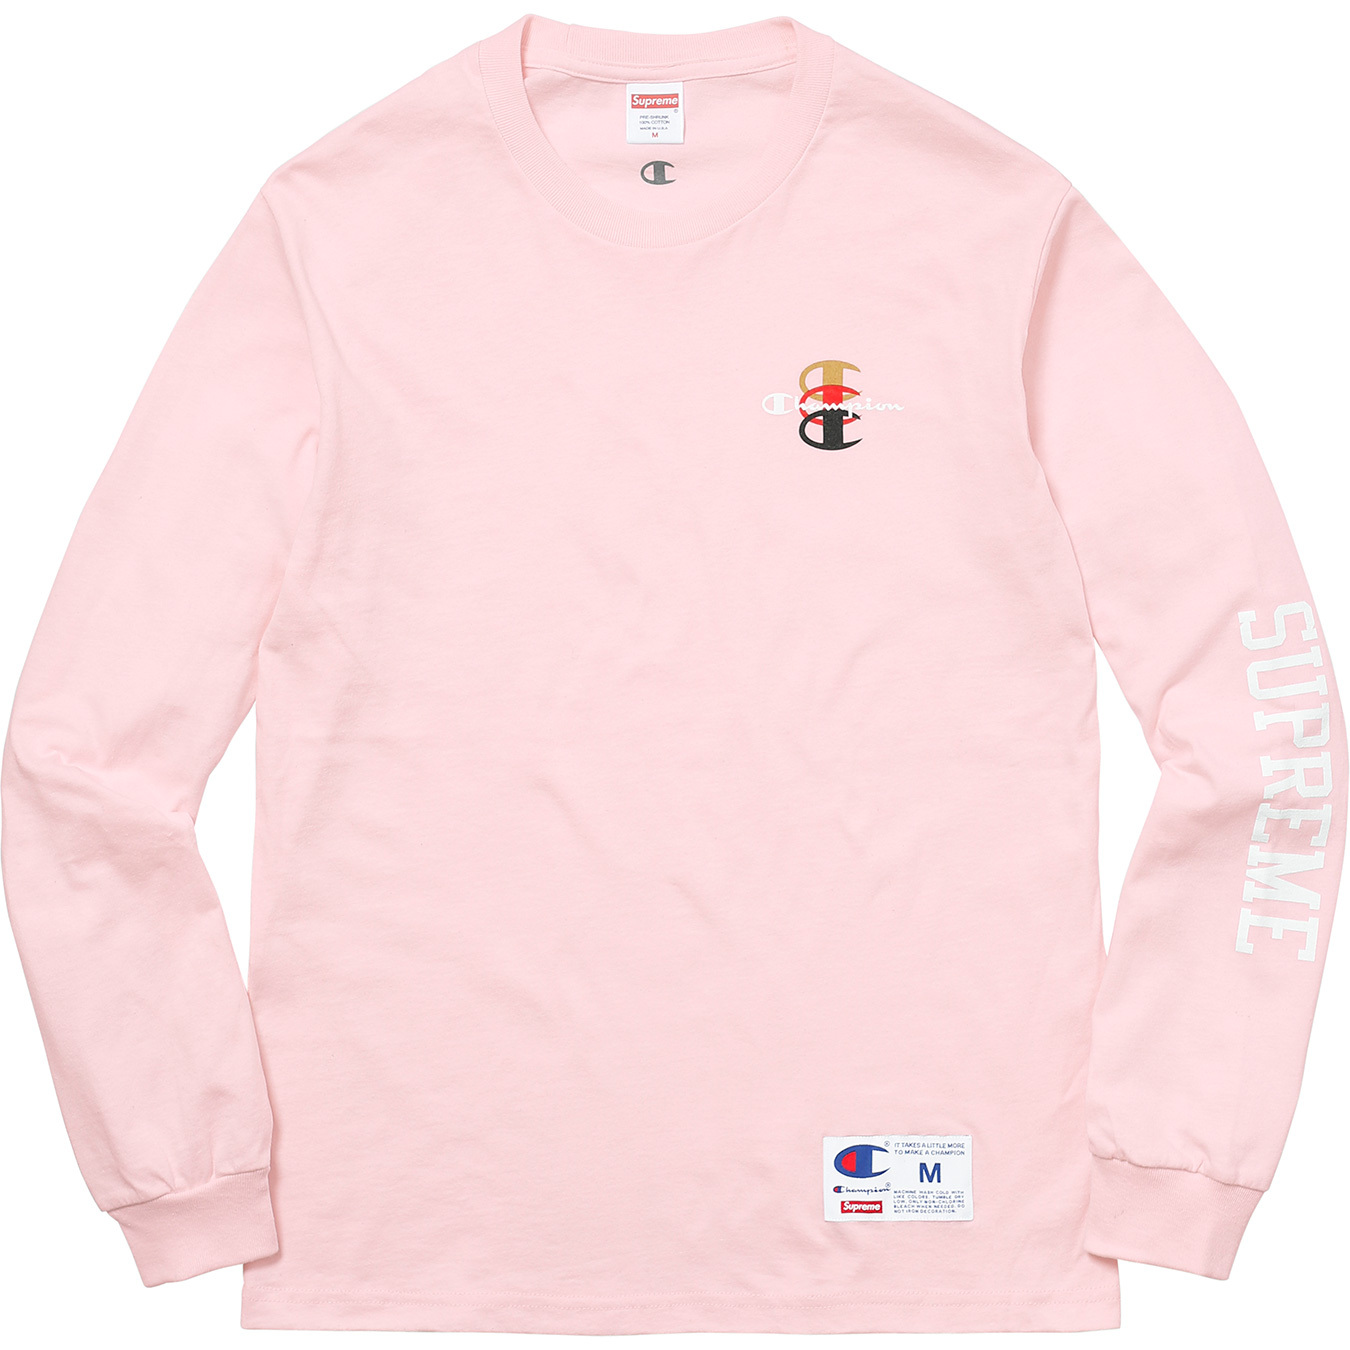 Champion Stacked C L S Tee - fall winter